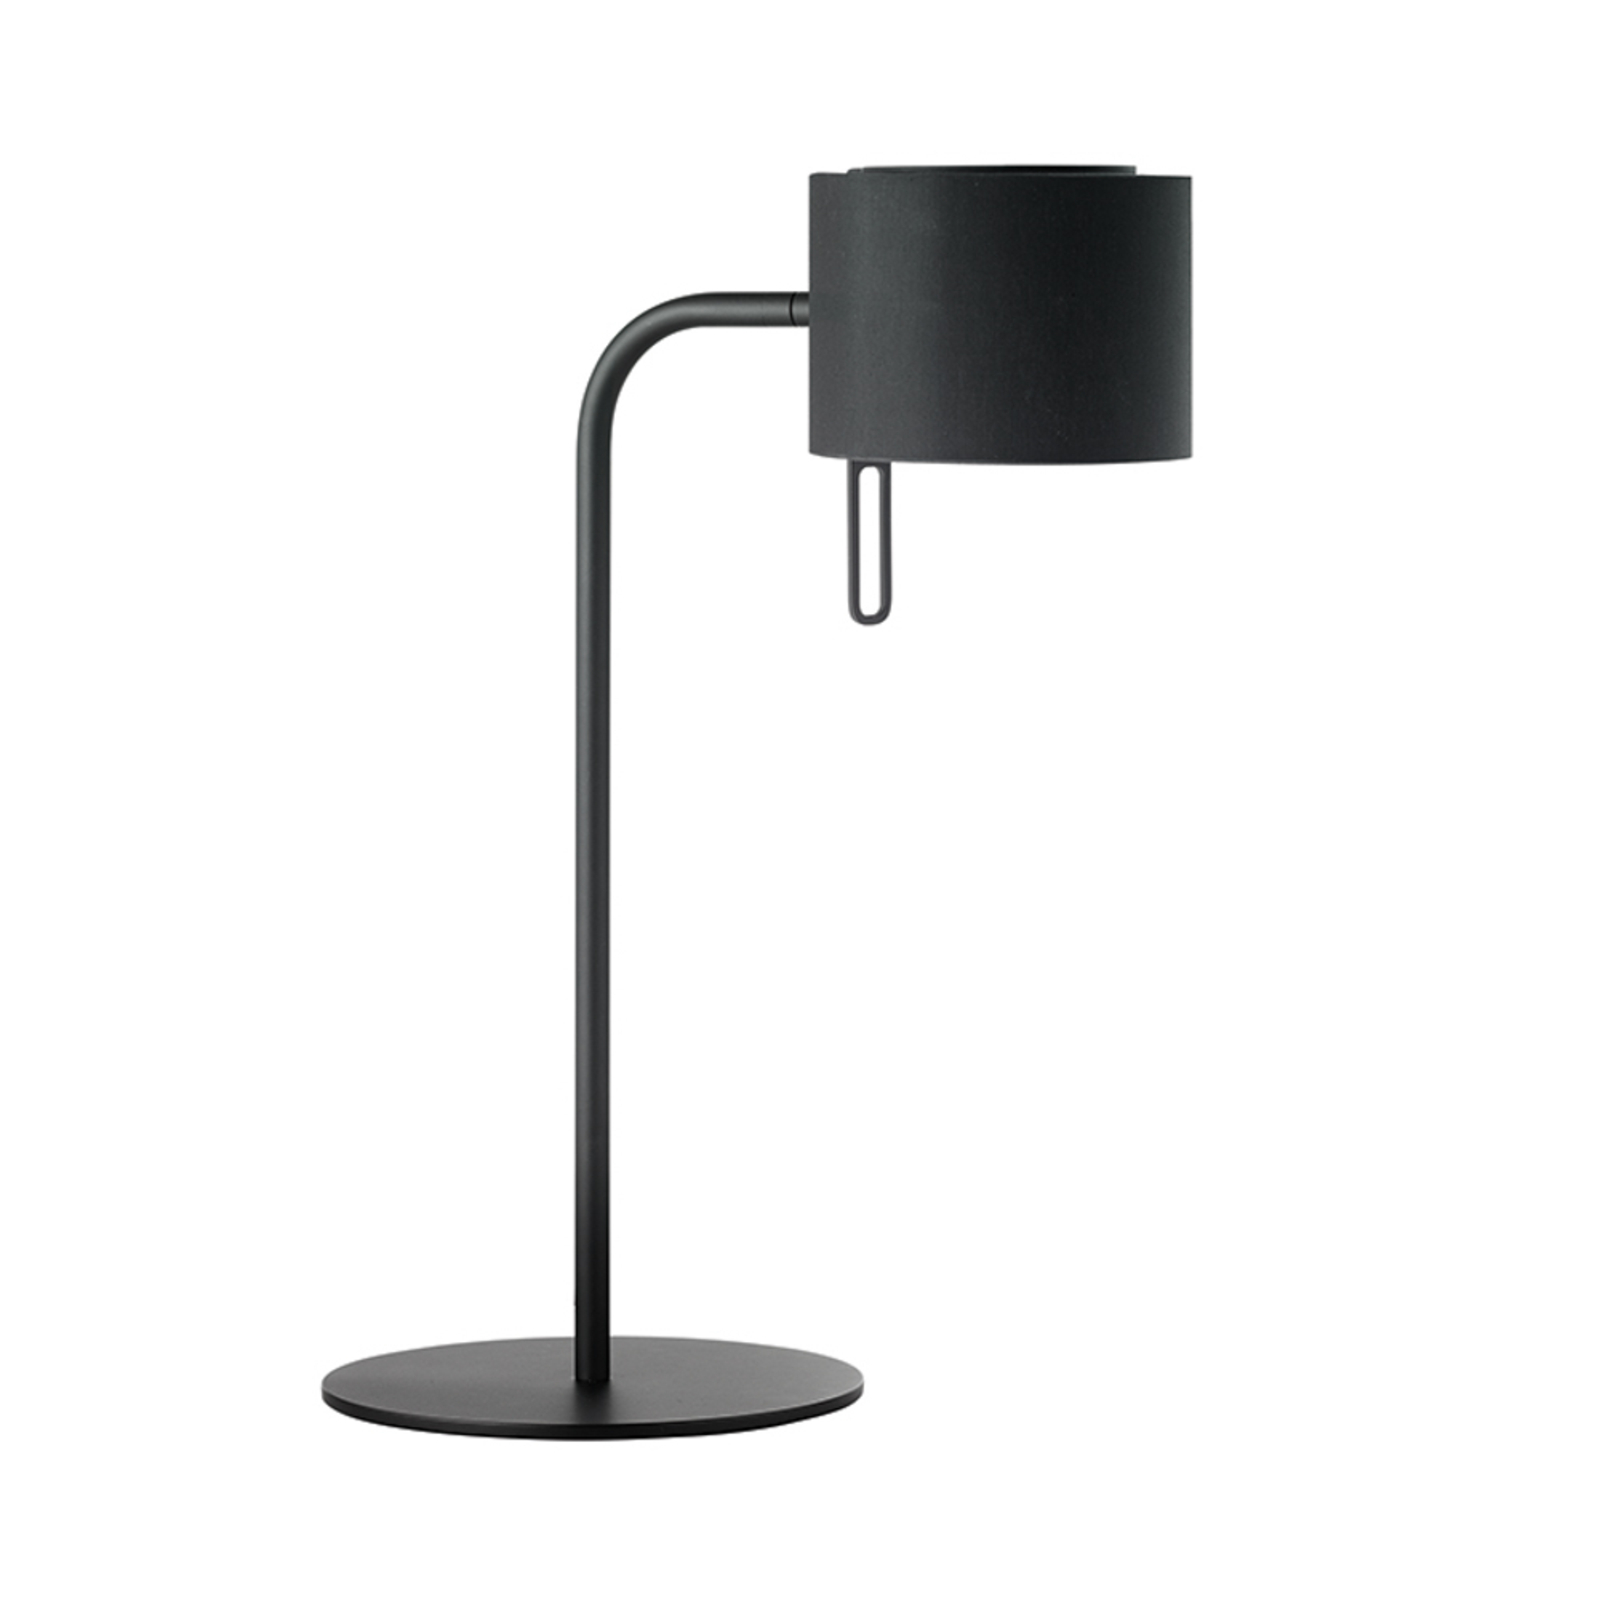 BRUMBERG 58146080 lampe à poser, inclinable